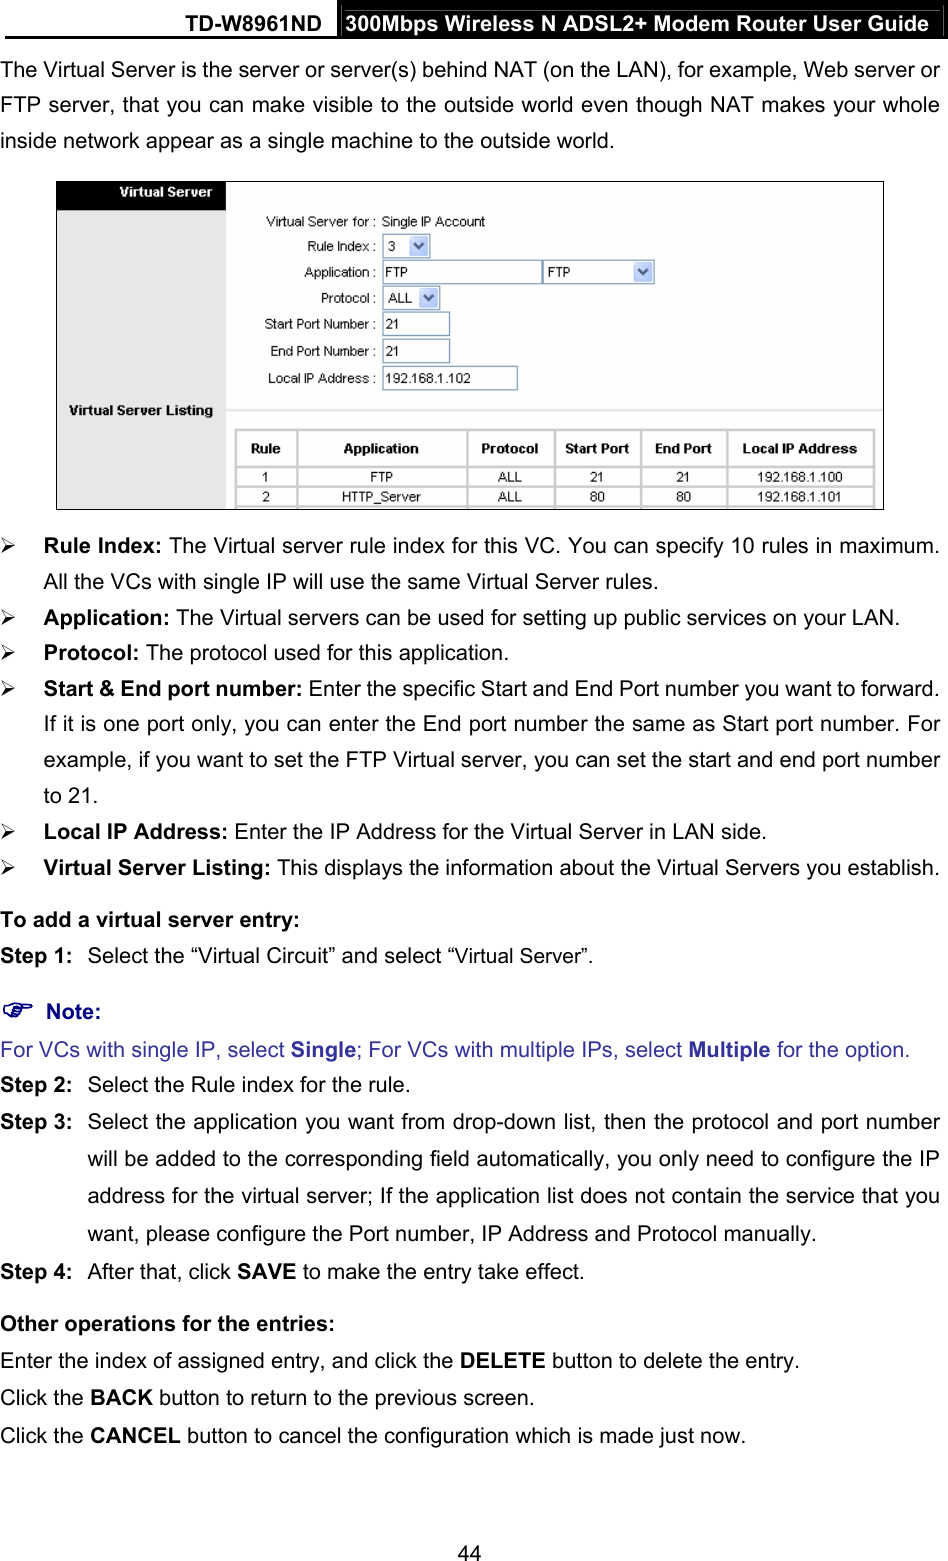 TD-W8961ND  300Mbps Wireless N ADSL2+ Modem Router User Guide  44The Virtual Server is the server or server(s) behind NAT (on the LAN), for example, Web server or FTP server, that you can make visible to the outside world even though NAT makes your whole inside network appear as a single machine to the outside world.   Rule Index: The Virtual server rule index for this VC. You can specify 10 rules in maximum. All the VCs with single IP will use the same Virtual Server rules.  Application: The Virtual servers can be used for setting up public services on your LAN.  Protocol: The protocol used for this application.  Start &amp; End port number: Enter the specific Start and End Port number you want to forward. If it is one port only, you can enter the End port number the same as Start port number. For example, if you want to set the FTP Virtual server, you can set the start and end port number to 21.  Local IP Address: Enter the IP Address for the Virtual Server in LAN side.  Virtual Server Listing: This displays the information about the Virtual Servers you establish. To add a virtual server entry:   Step 1:  Select the “Virtual Circuit” and select “Virtual Server”.  Note: For VCs with single IP, select Single; For VCs with multiple IPs, select Multiple for the option. Step 2:  Select the Rule index for the rule. Step 3:  Select the application you want from drop-down list, then the protocol and port number will be added to the corresponding field automatically, you only need to configure the IP address for the virtual server; If the application list does not contain the service that you want, please configure the Port number, IP Address and Protocol manually. Step 4:  After that, click SAVE to make the entry take effect. Other operations for the entries: Enter the index of assigned entry, and click the DELETE button to delete the entry. Click the BACK button to return to the previous screen. Click the CANCEL button to cancel the configuration which is made just now. 